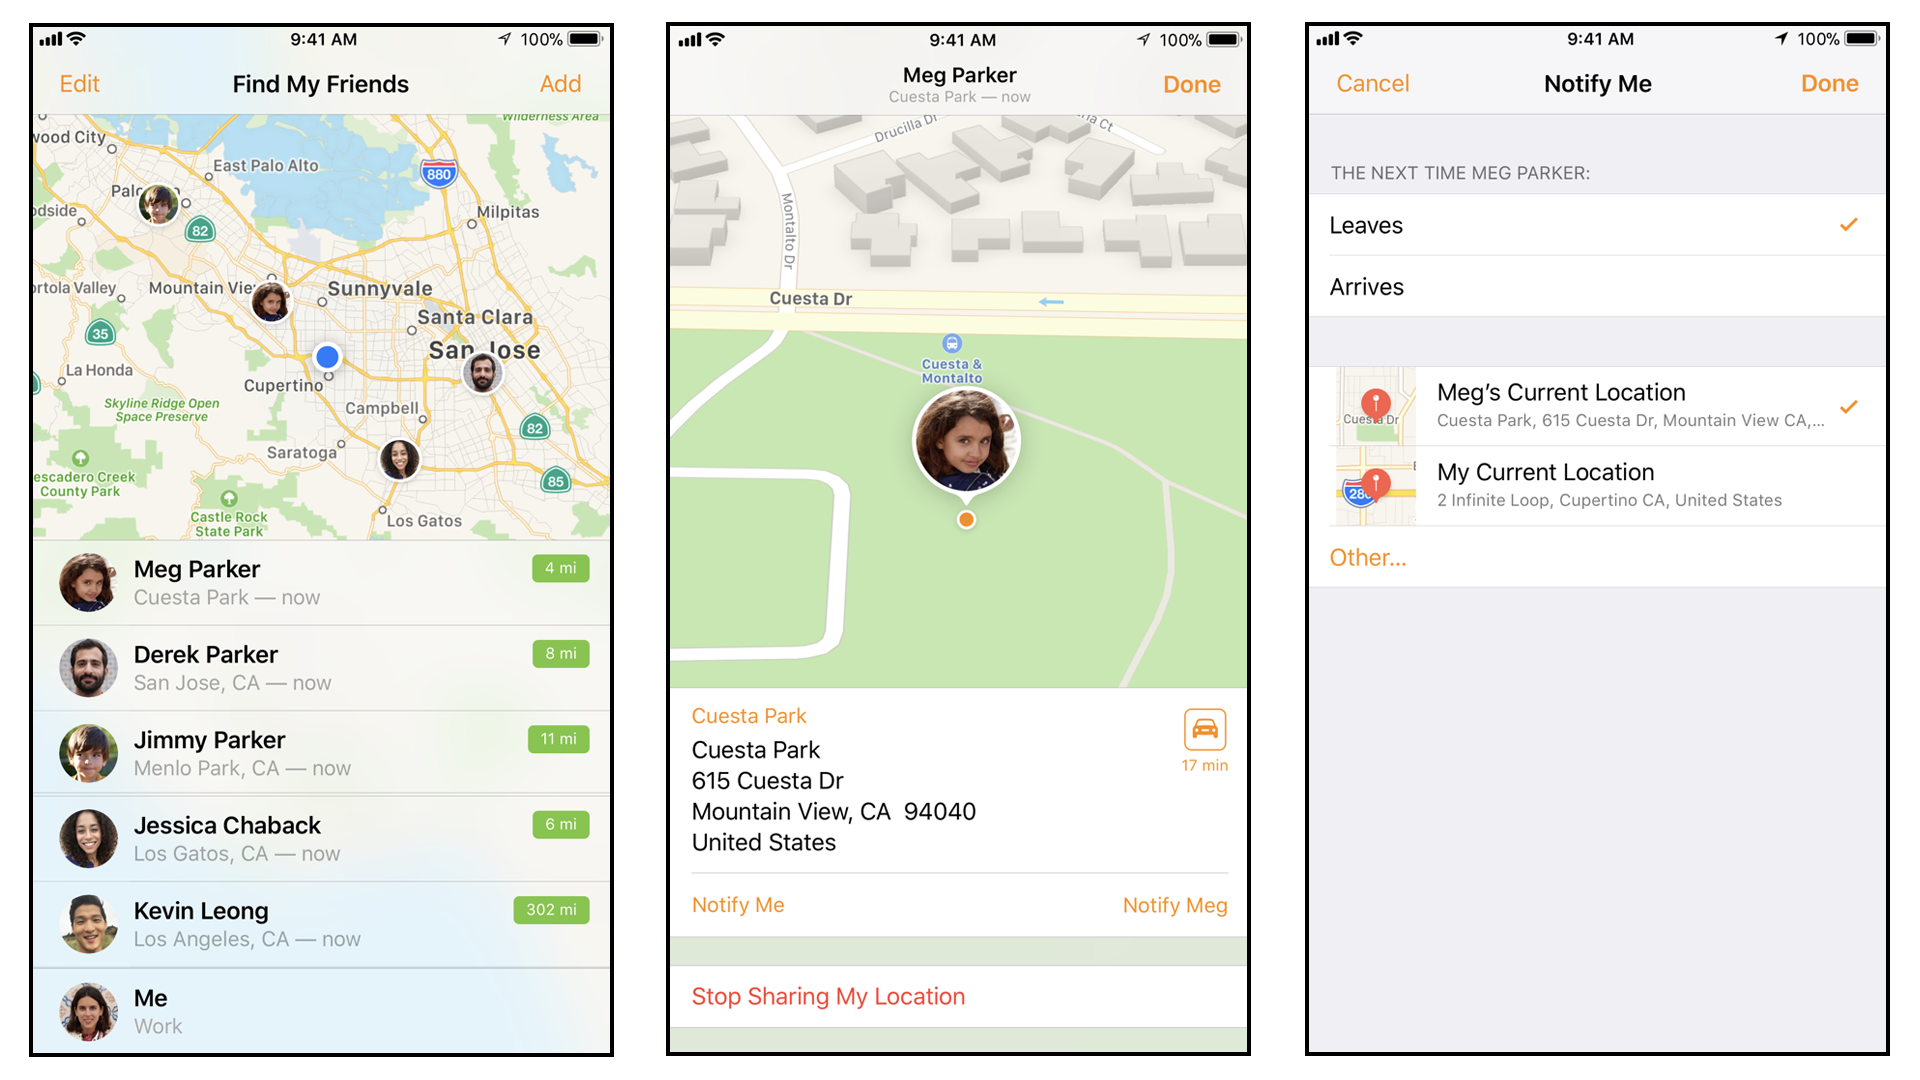 Find My Friends app showing person's location details and notification options